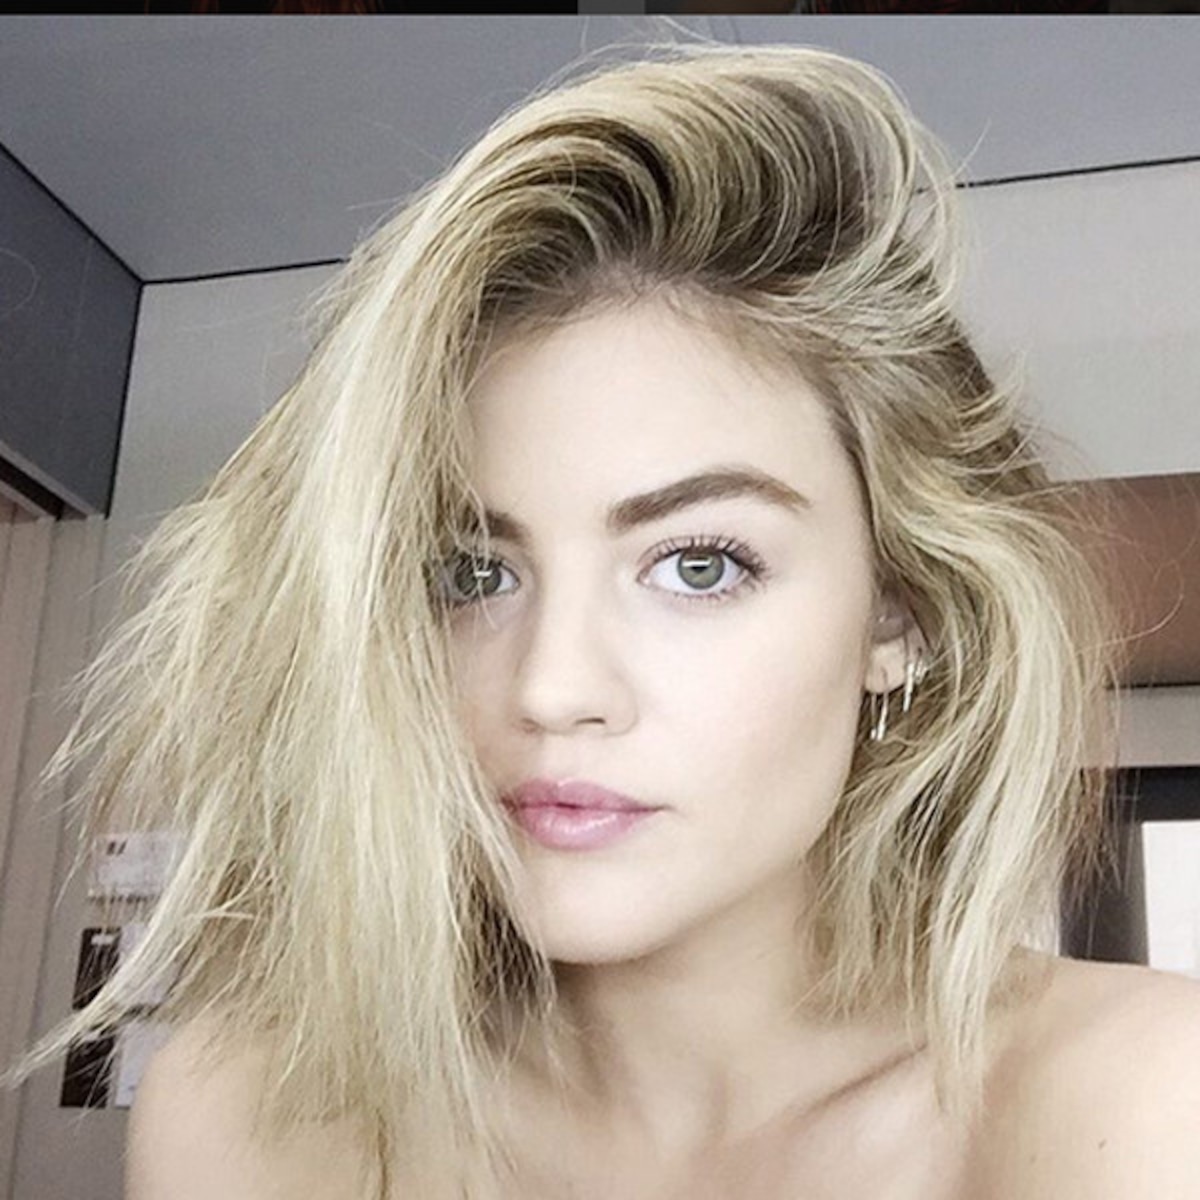 Hale pics lucy hacked Lucy Hale